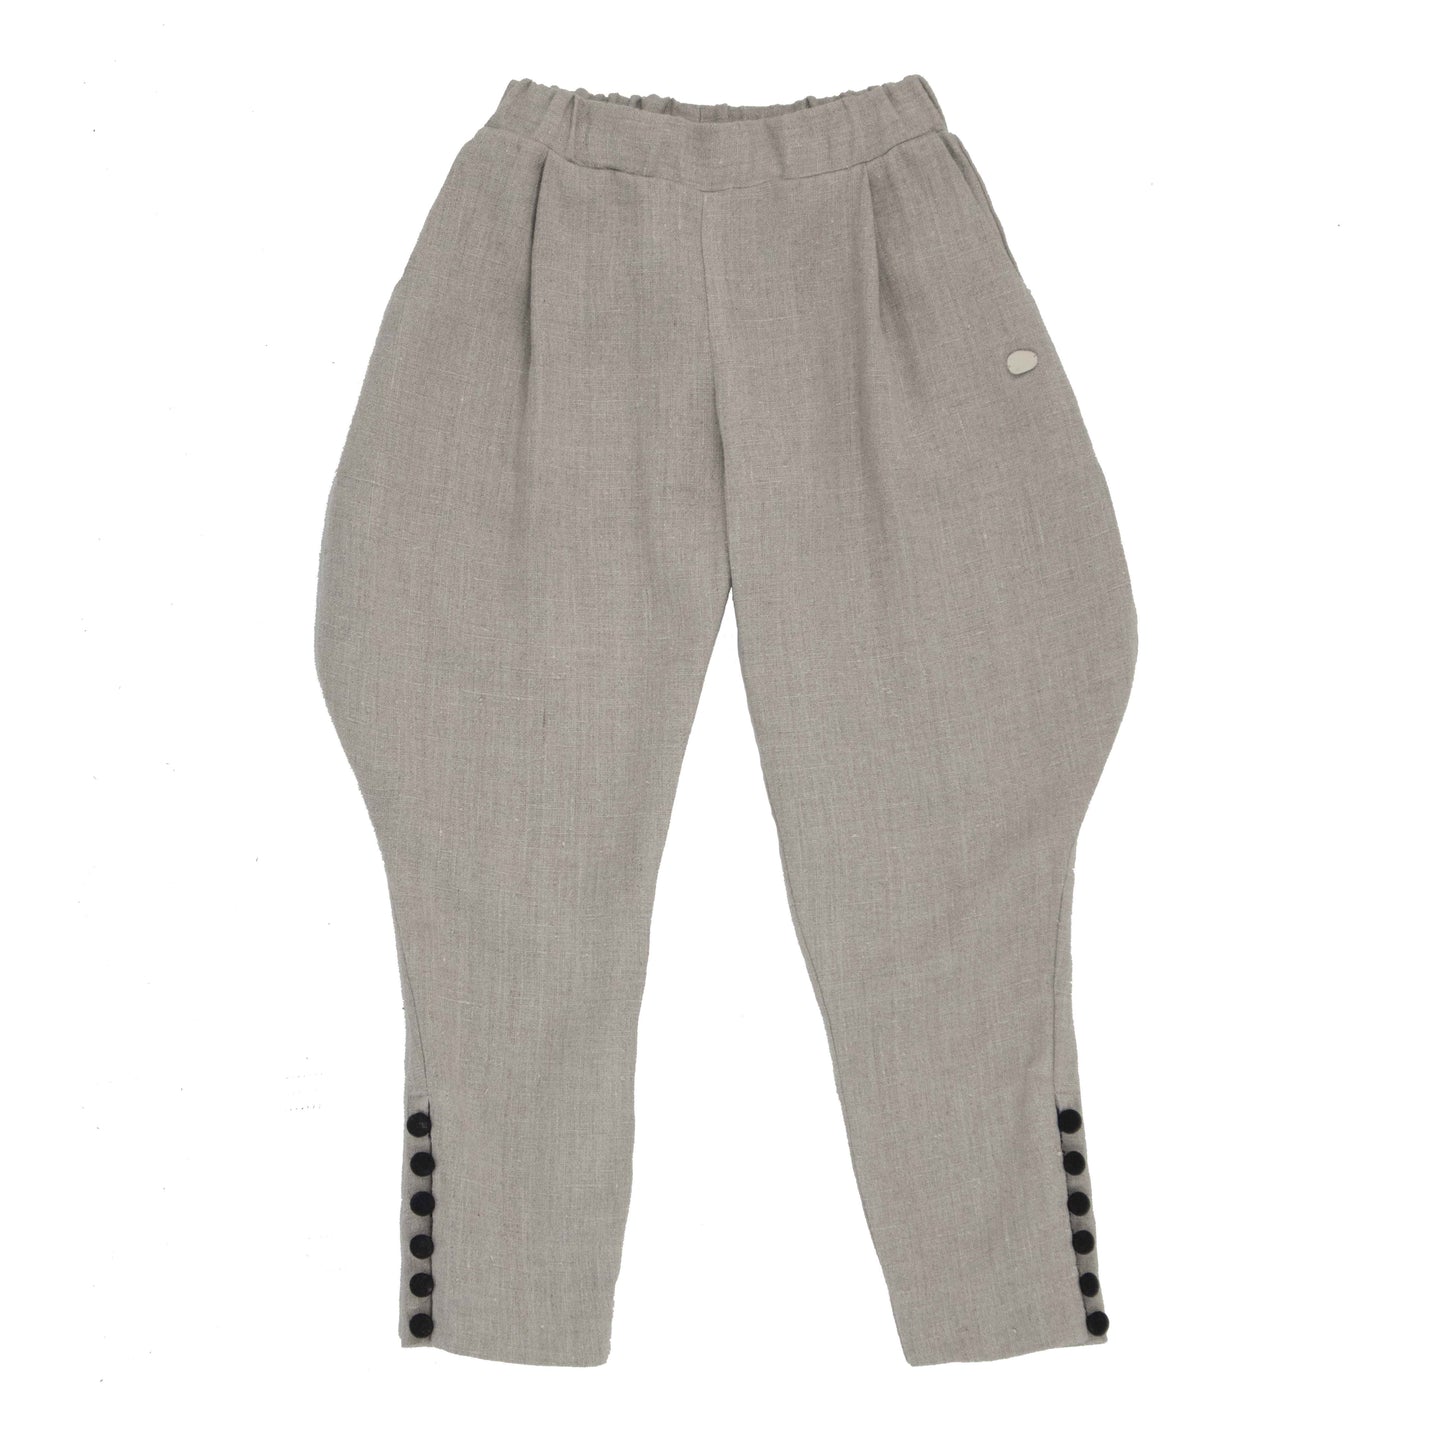 UPA DELILAH Trousers MADE TO ORDER